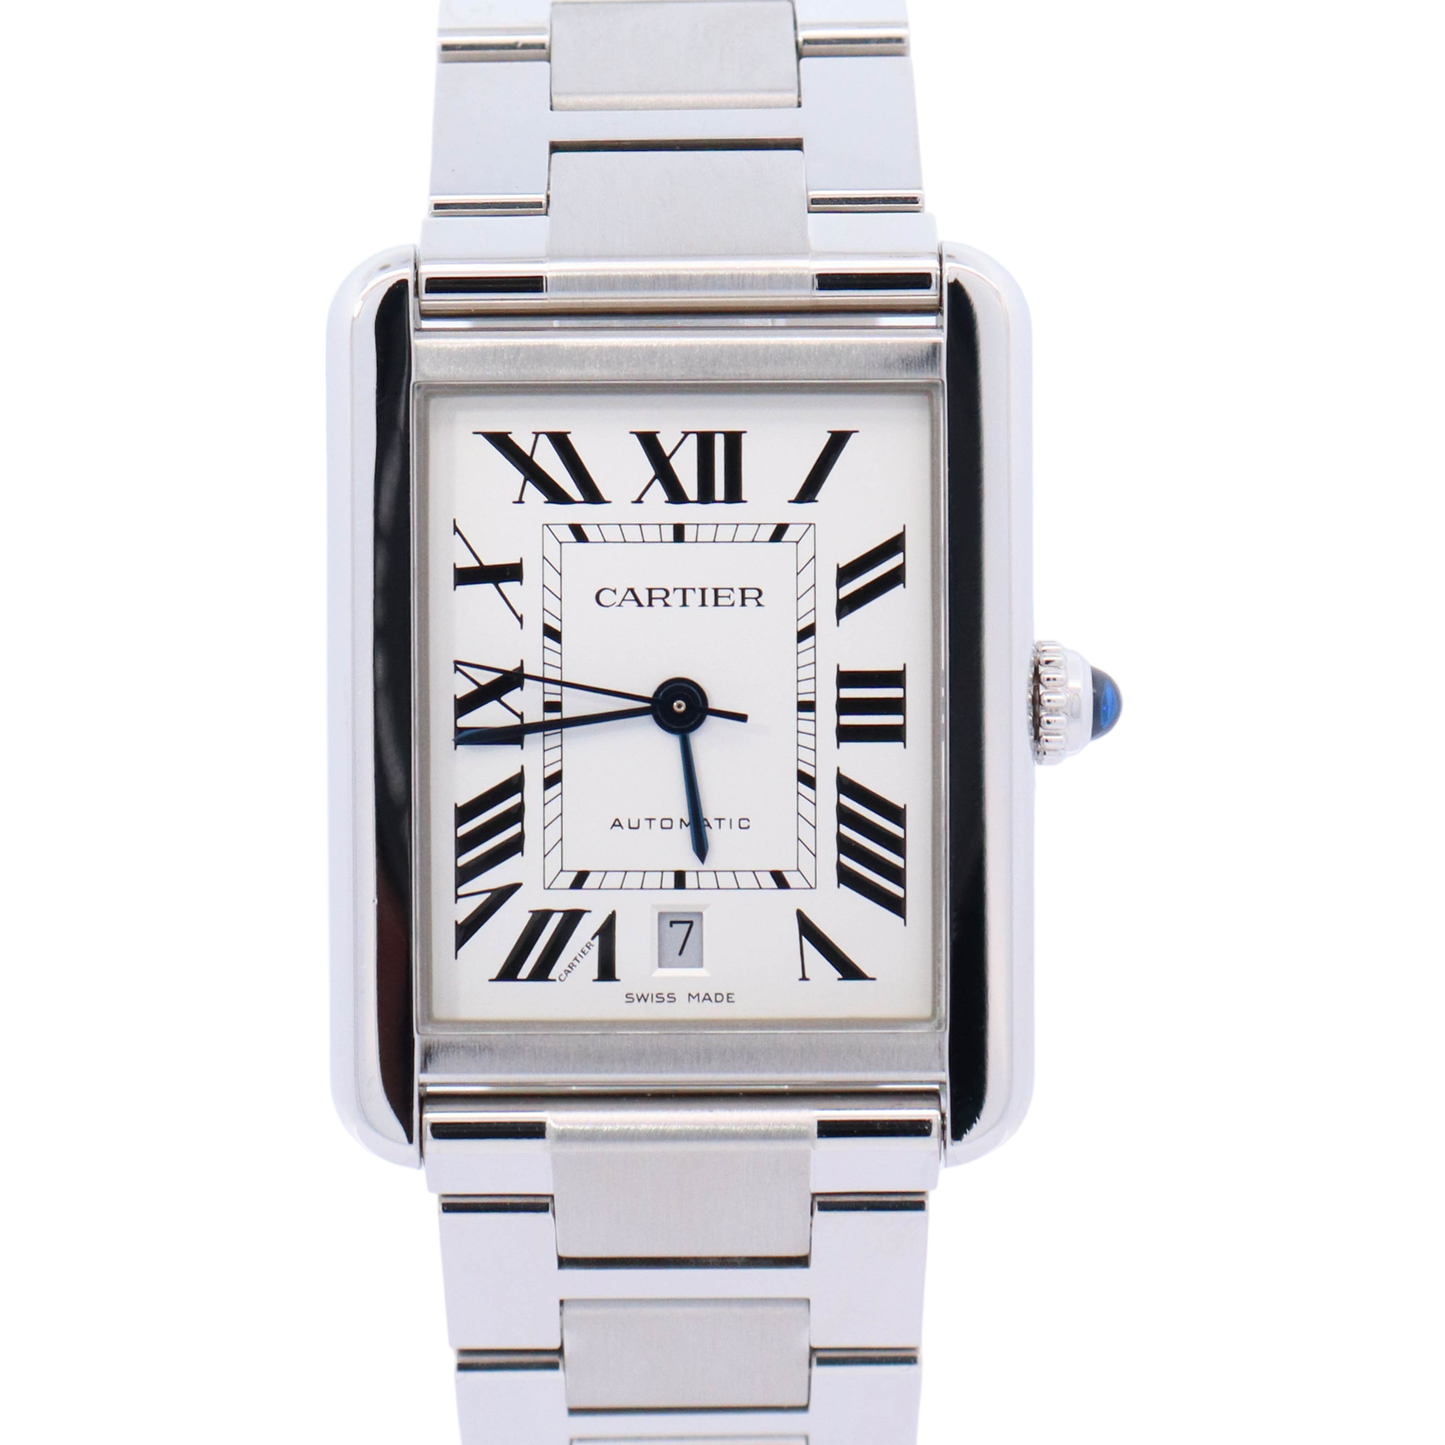 Cartier Tank Anglaise 40.85x31mm Stainless Steel White Roman Dial Watch Reference# W5200028 - Happy Jewelers Fine Jewelry Lifetime Warranty